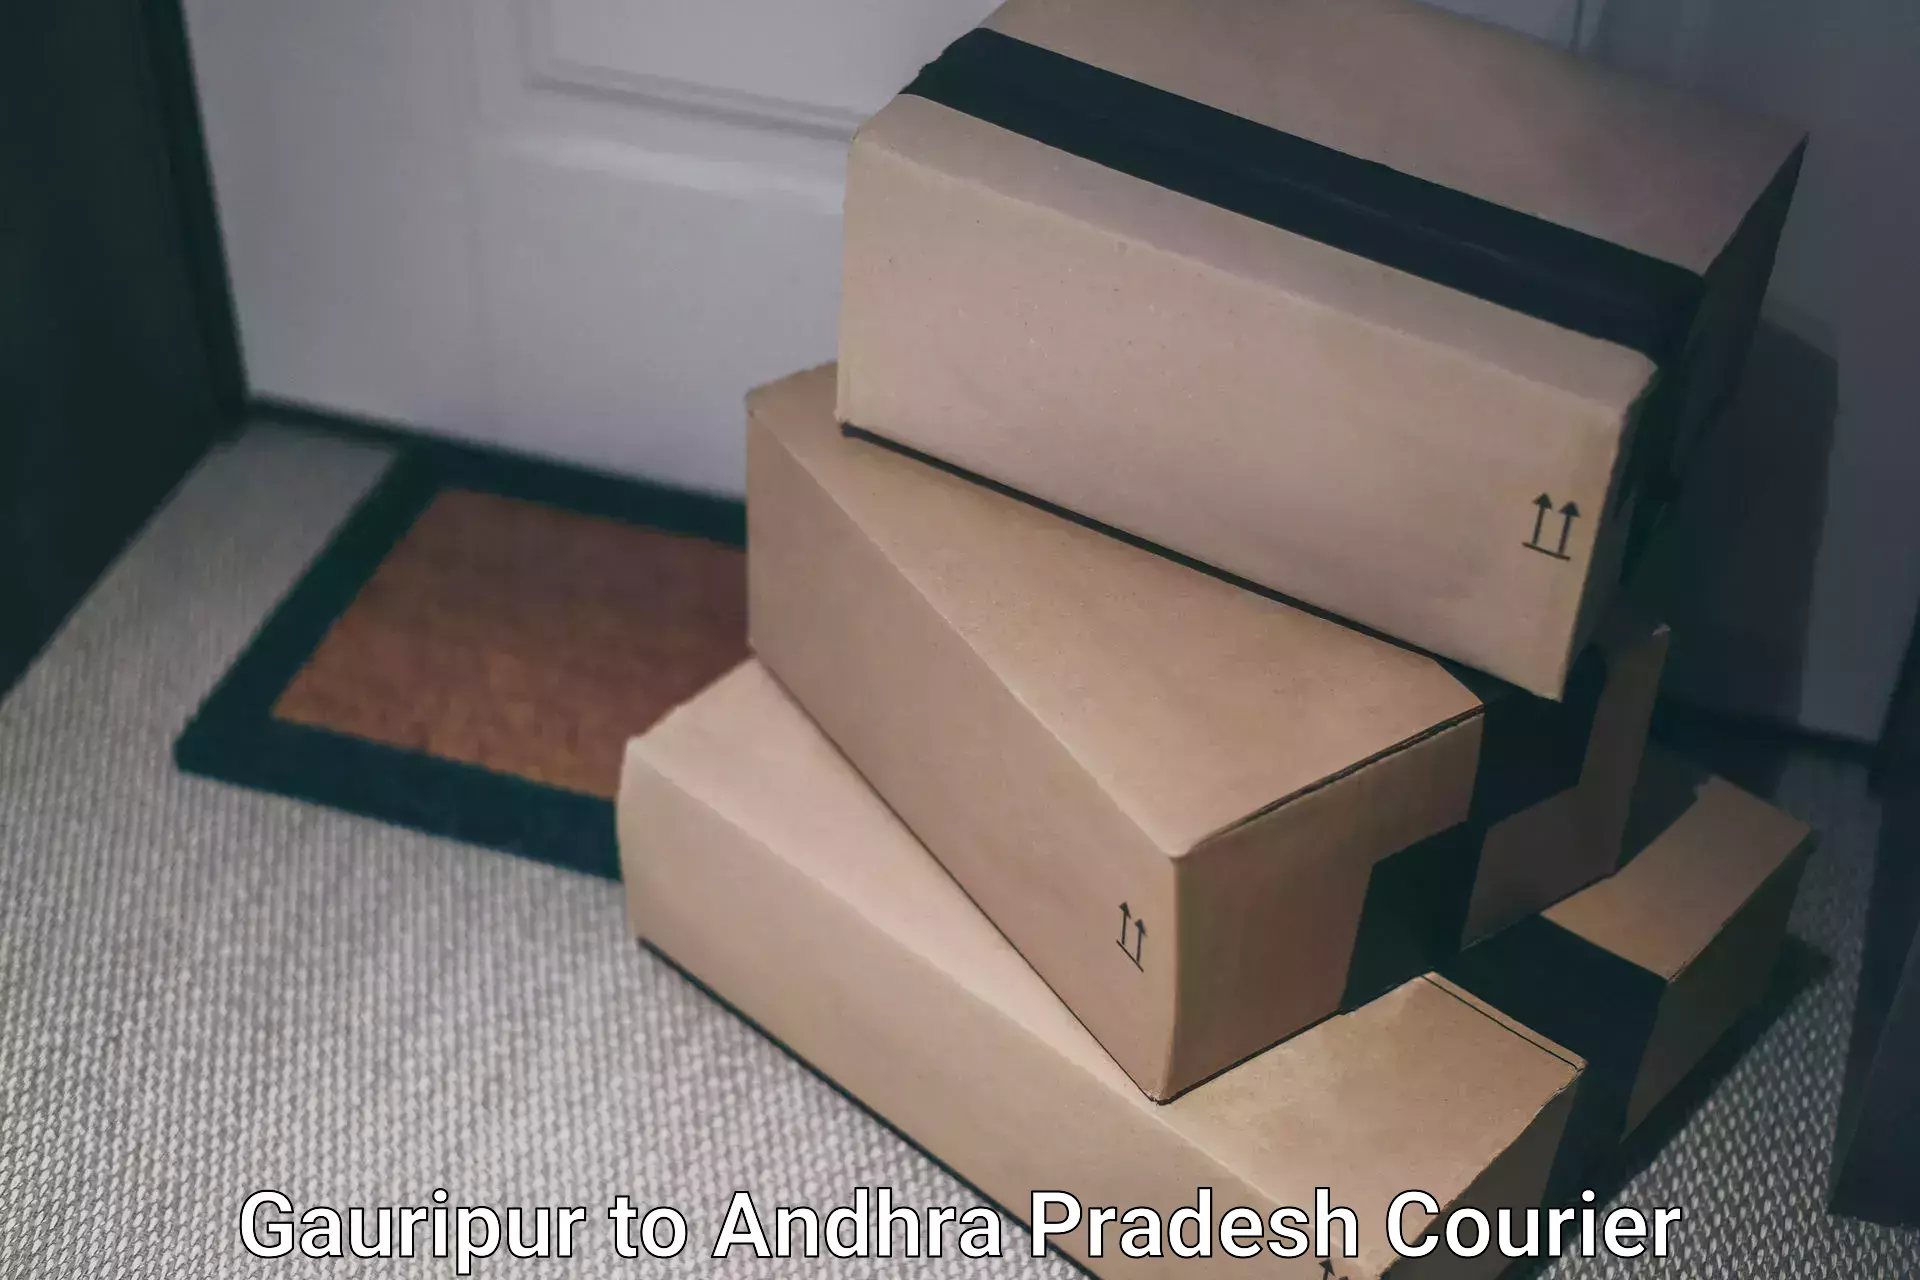 Subscription-based courier Gauripur to Rajahmundry